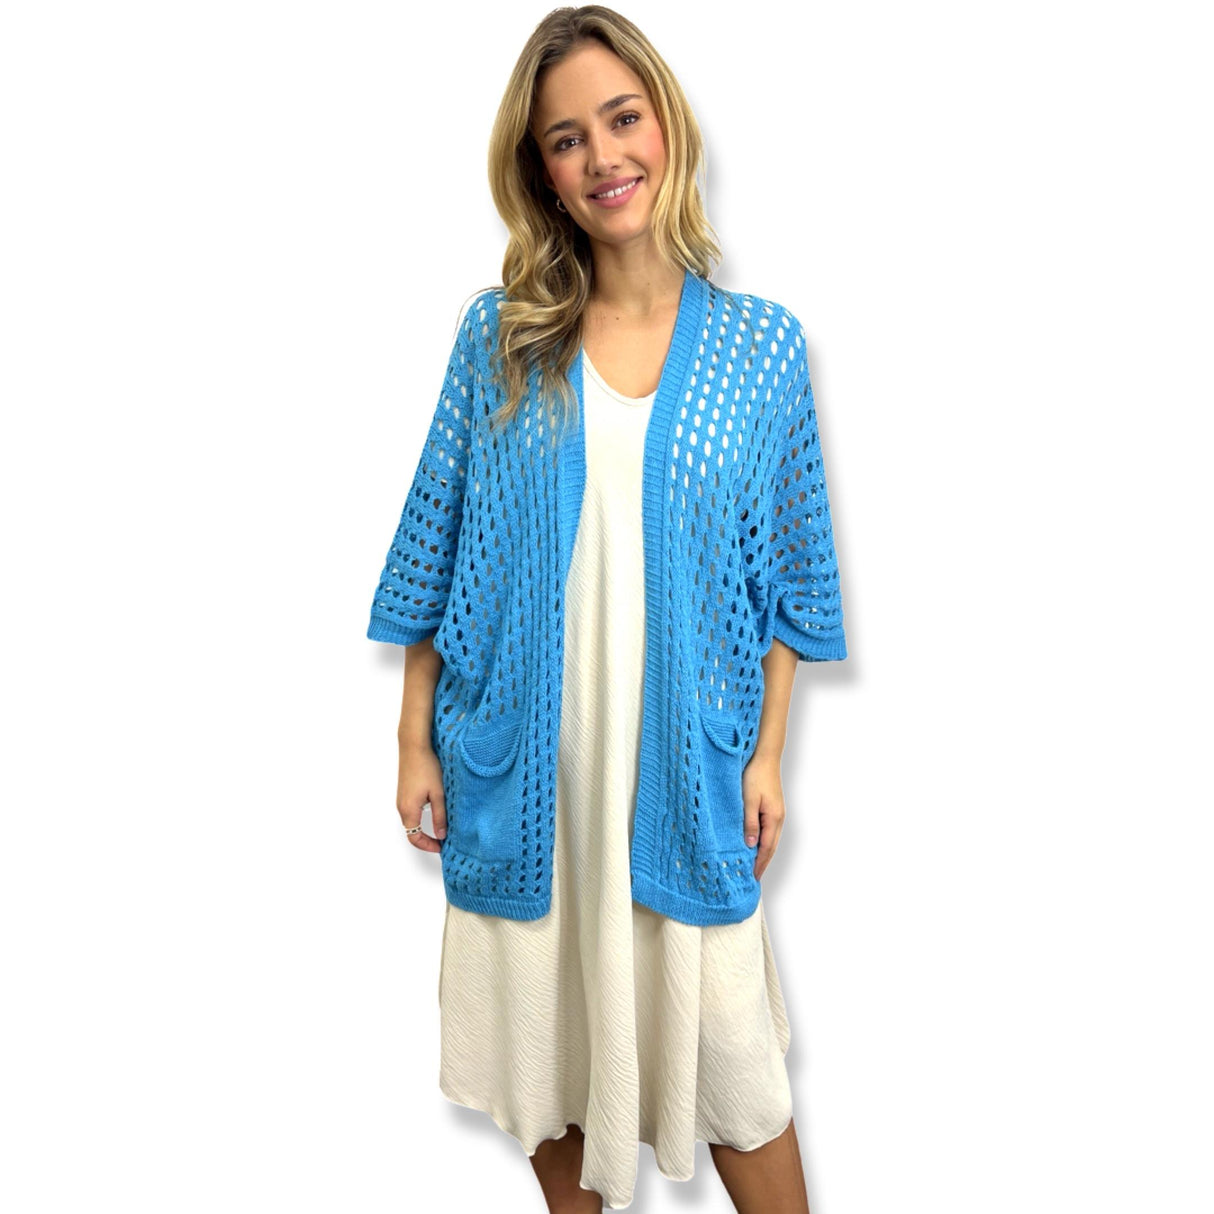 CROCHET CARDIGAN OVER HIP WITH 2 FRONT POCKETS 100% COTTON